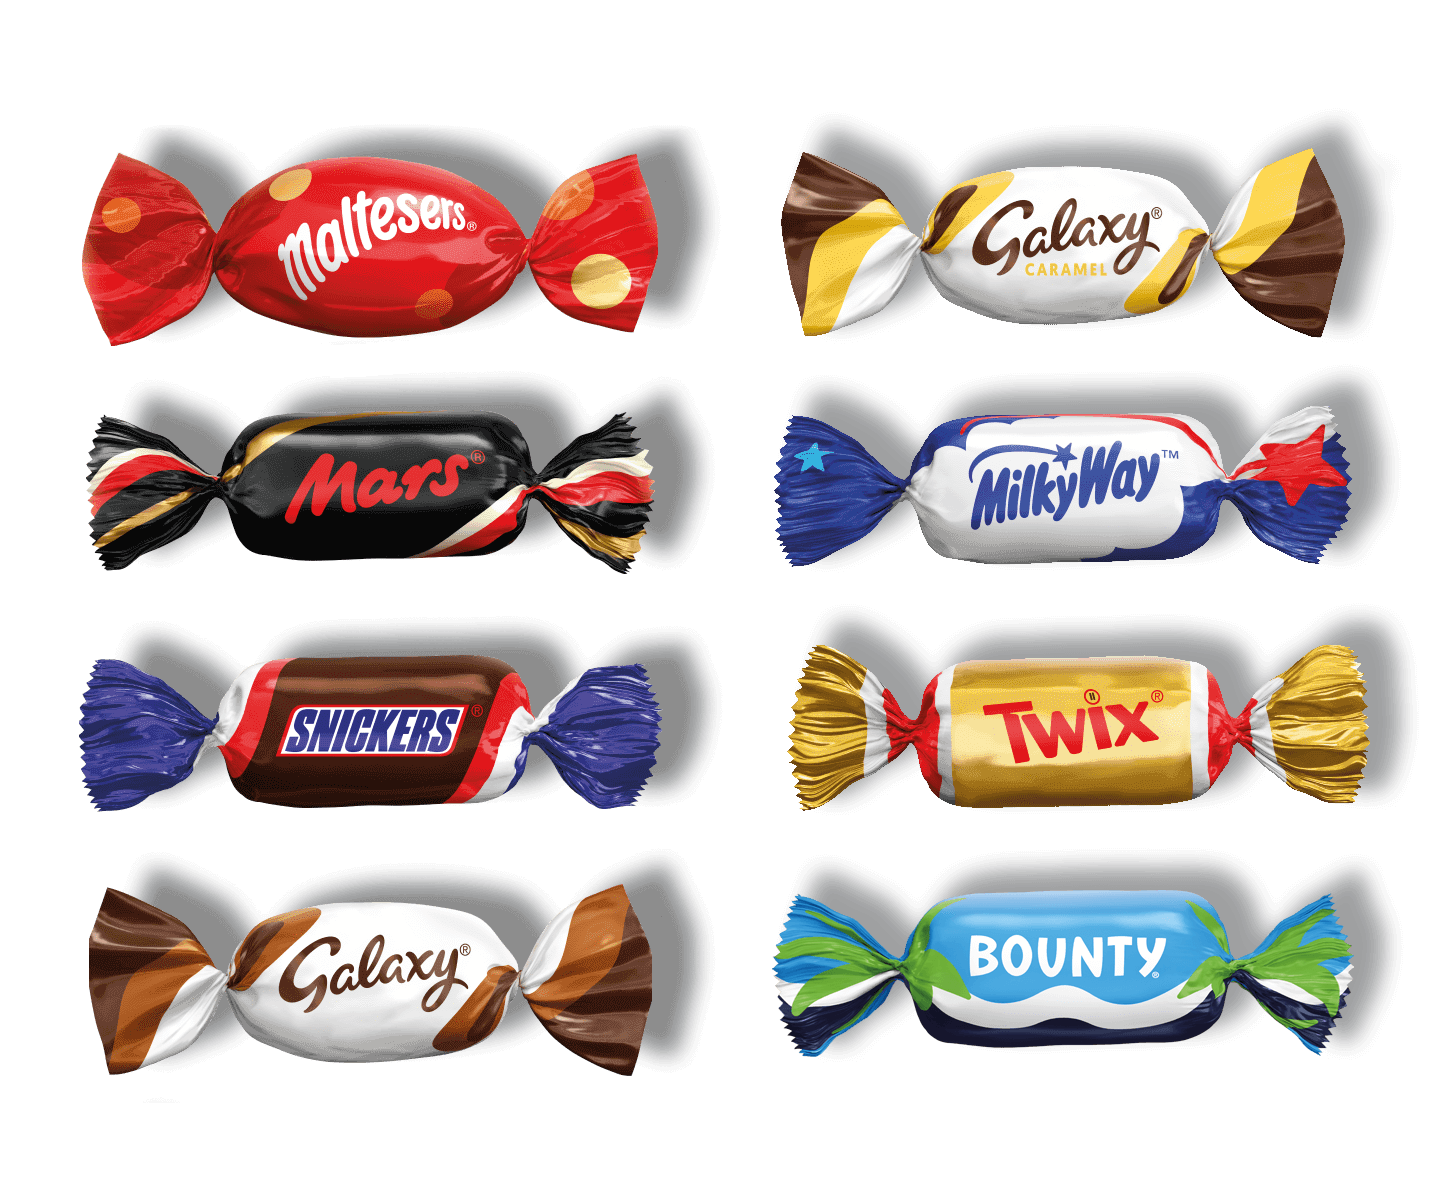 Wrapped candy pieces of SNICKERS, MALTESERS, MARS, MILKY WAY, TWIX, BOUNTY, and GALAXY Caramel